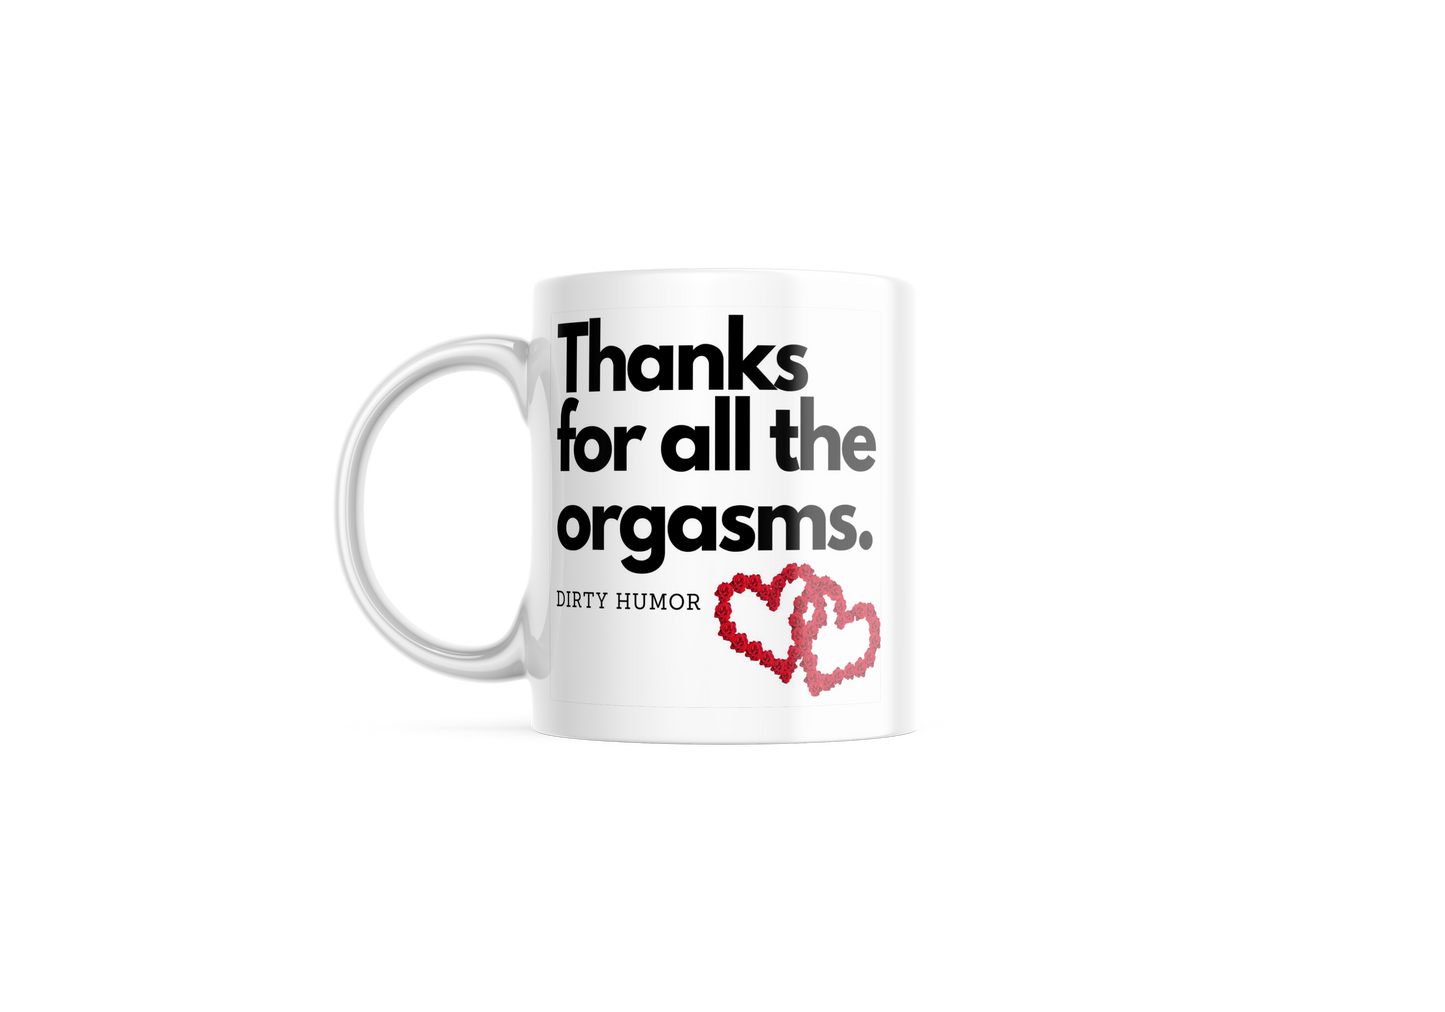 Thanks for all the orgasms.